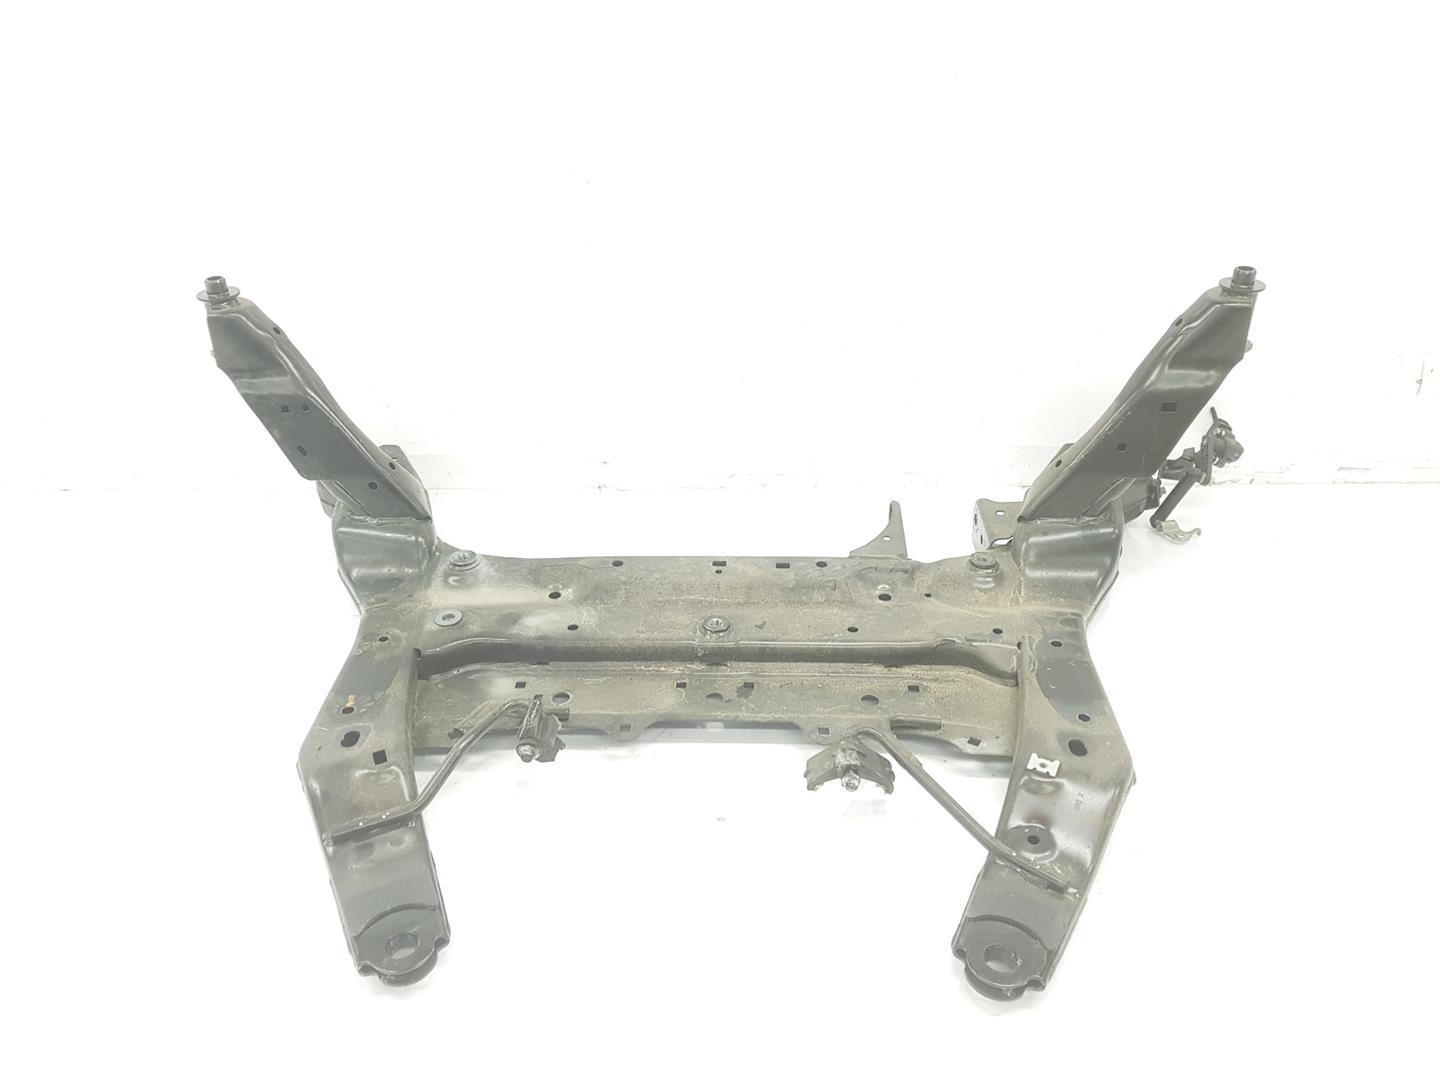 BMW X1 (F48) Front Suspension Subframe 31116872729, 31116872729 23777788